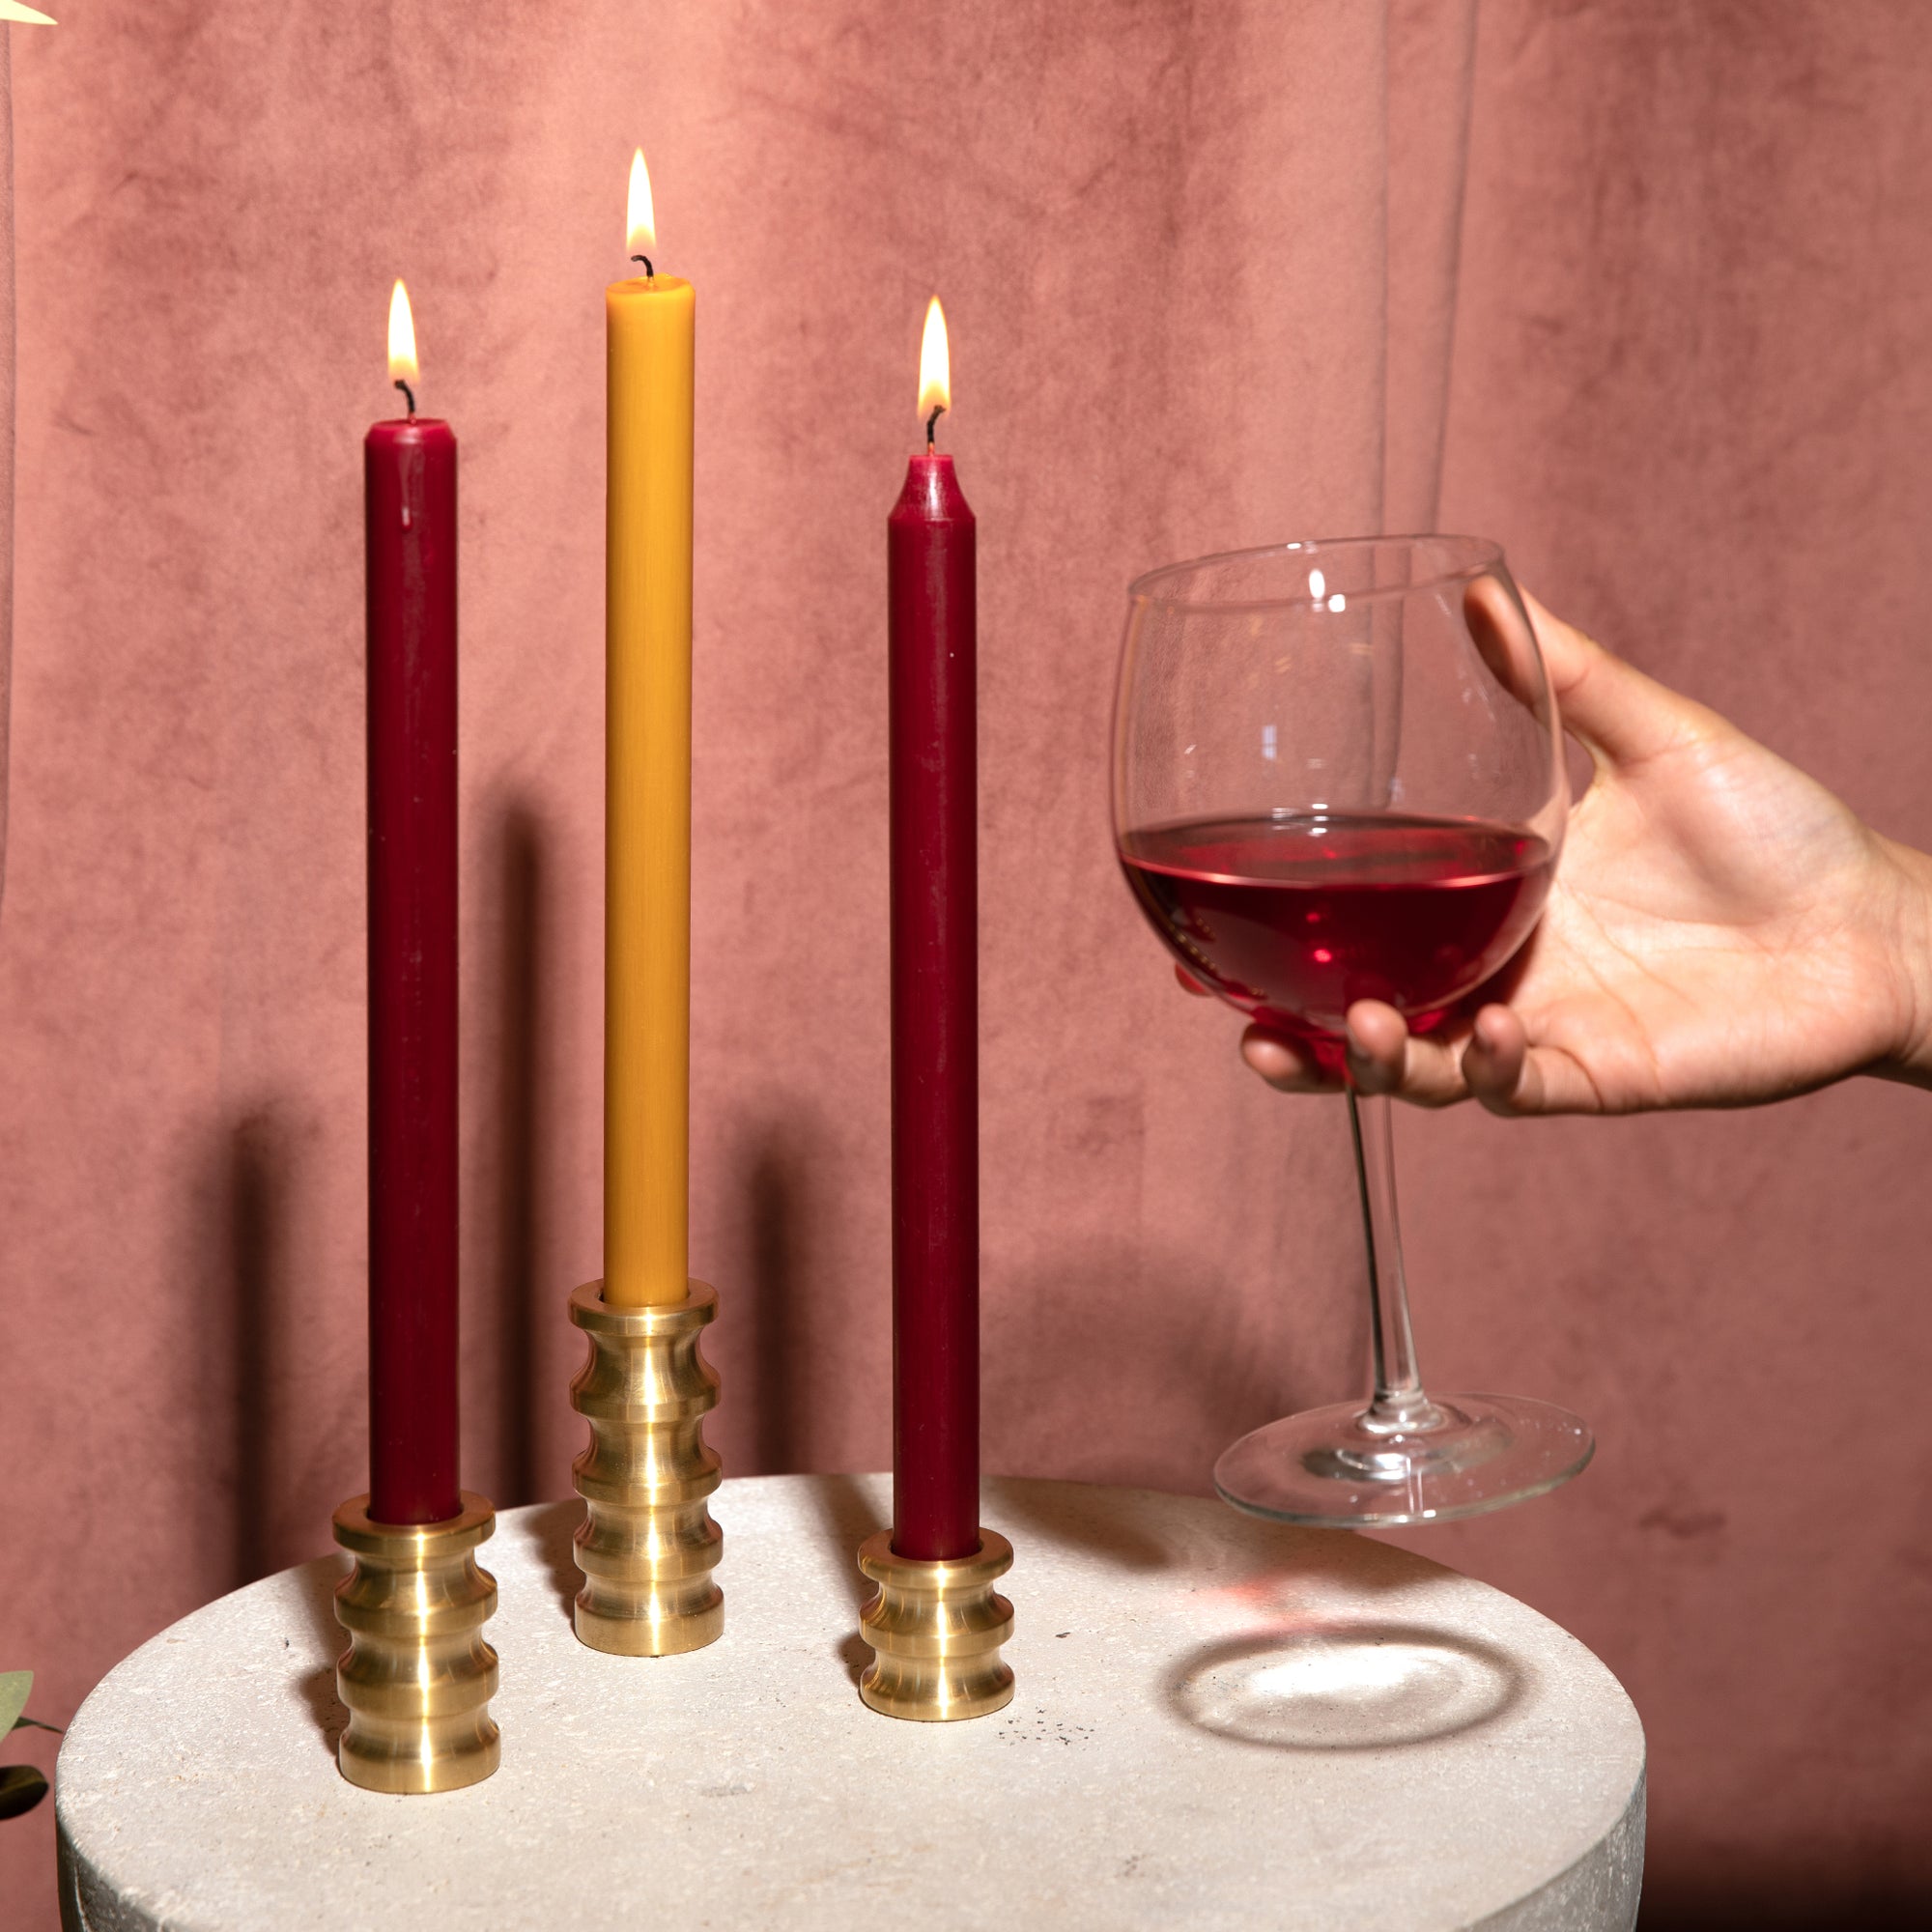 Sway candleholders with burgundy and harvest gold candles